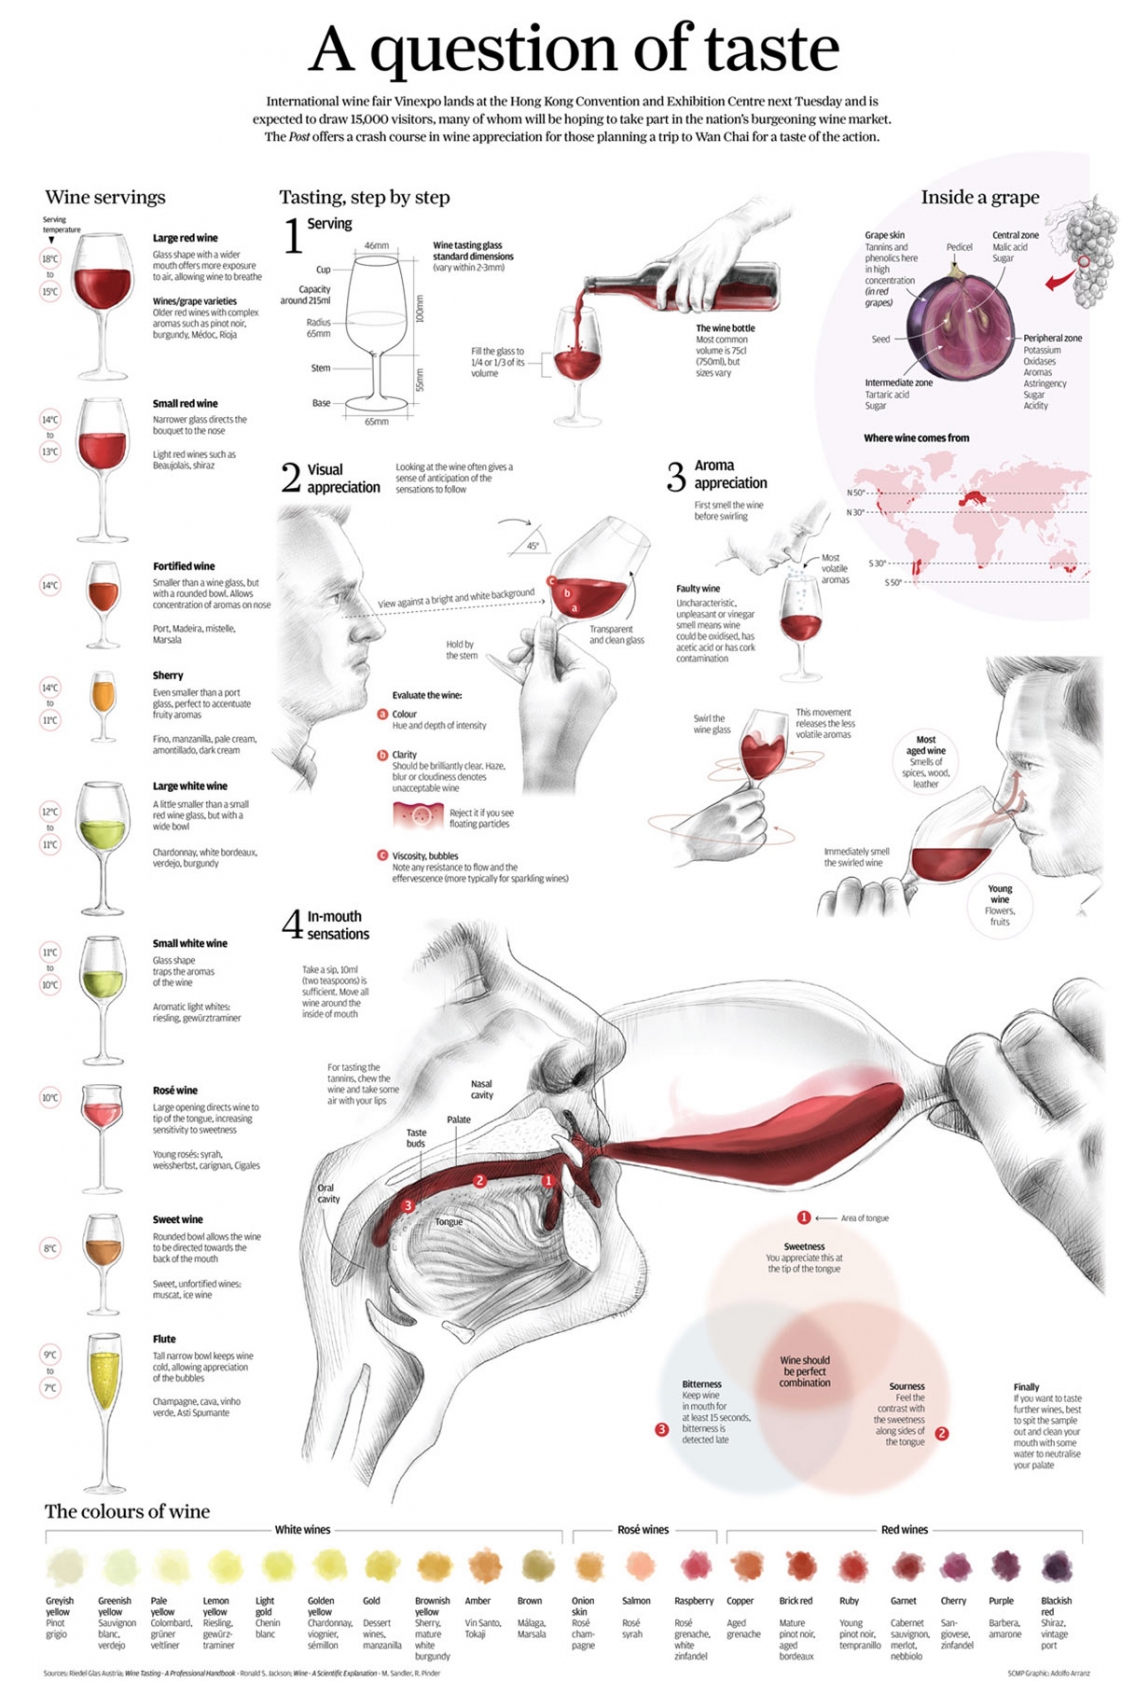 The Connoisseur Way to Tasting Wine Infographic